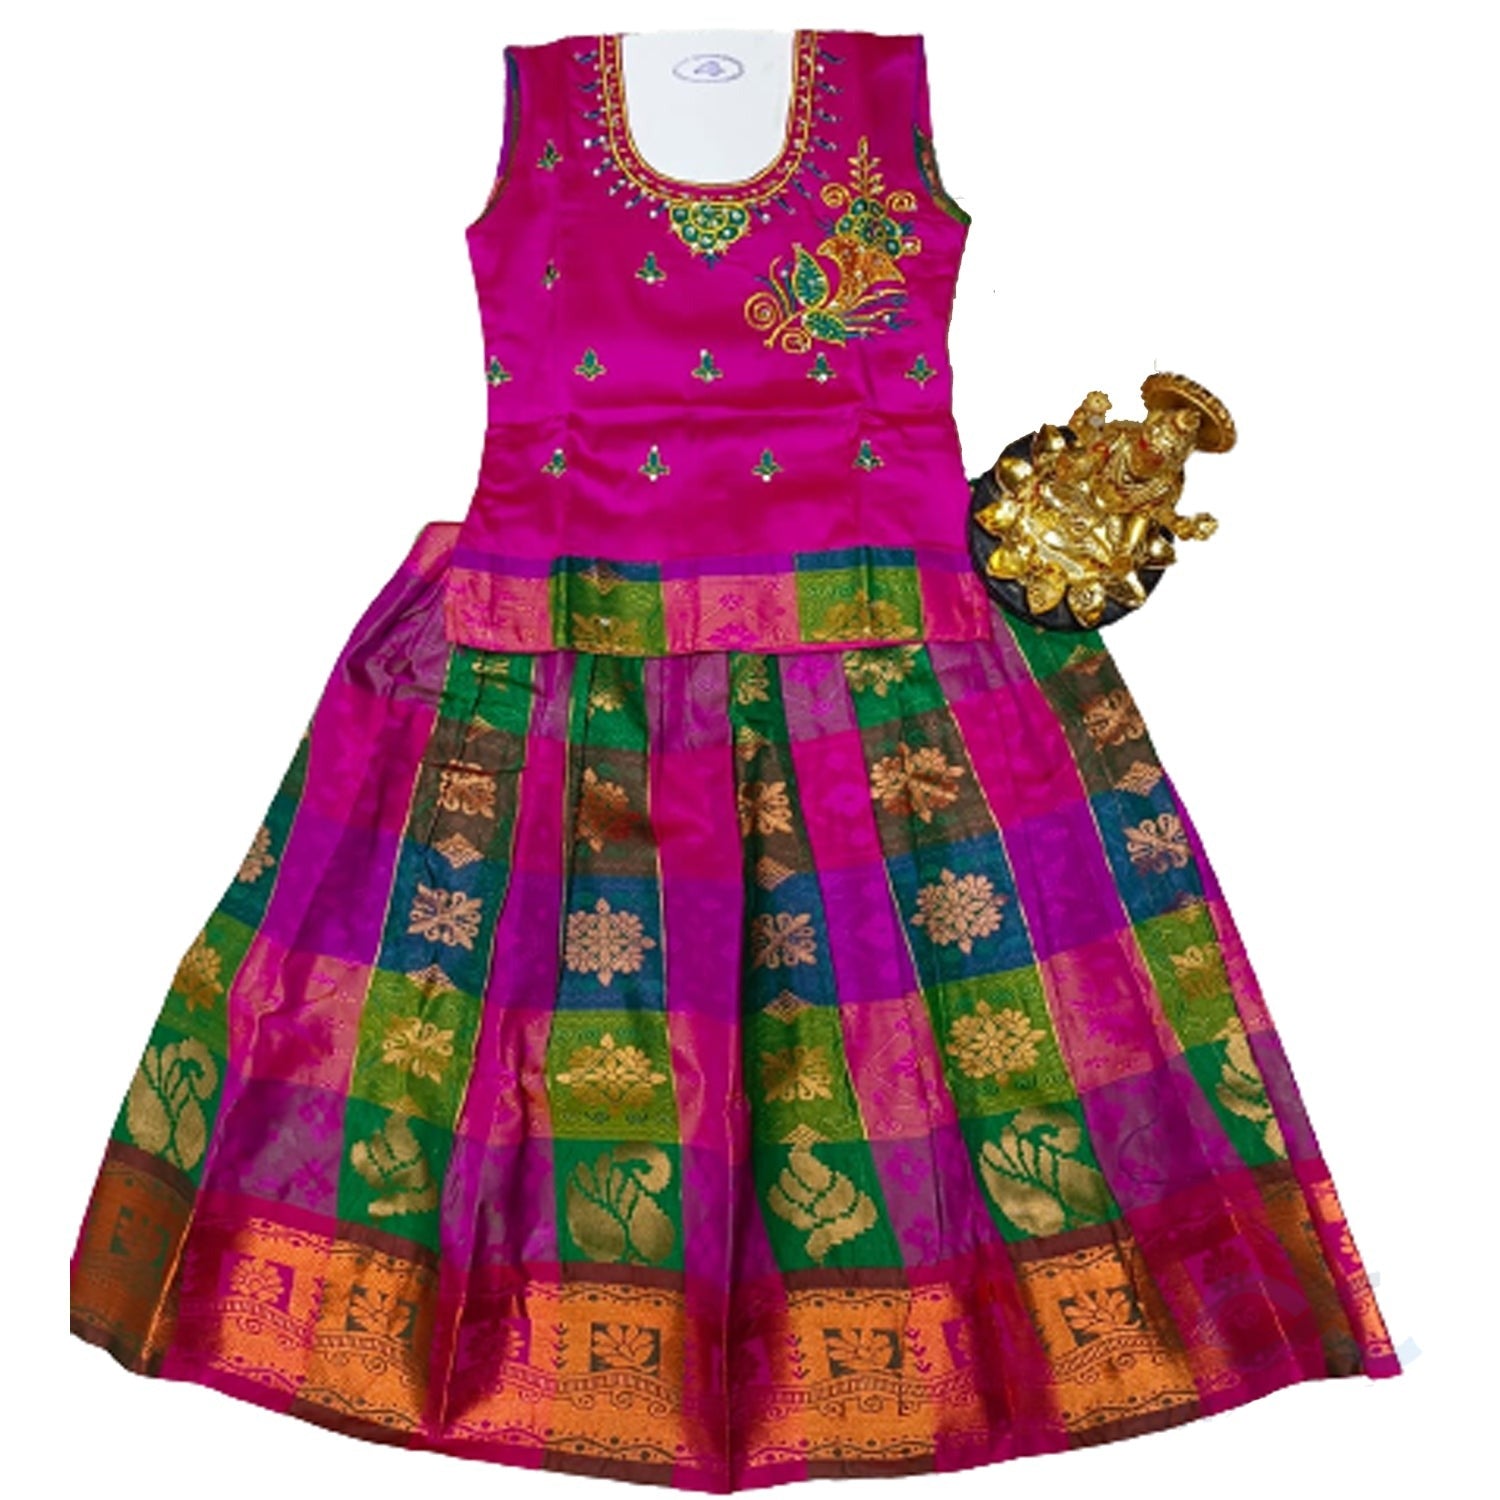 Cute girl dress 1 to 4years | Order from Rikeys faster and cheaper